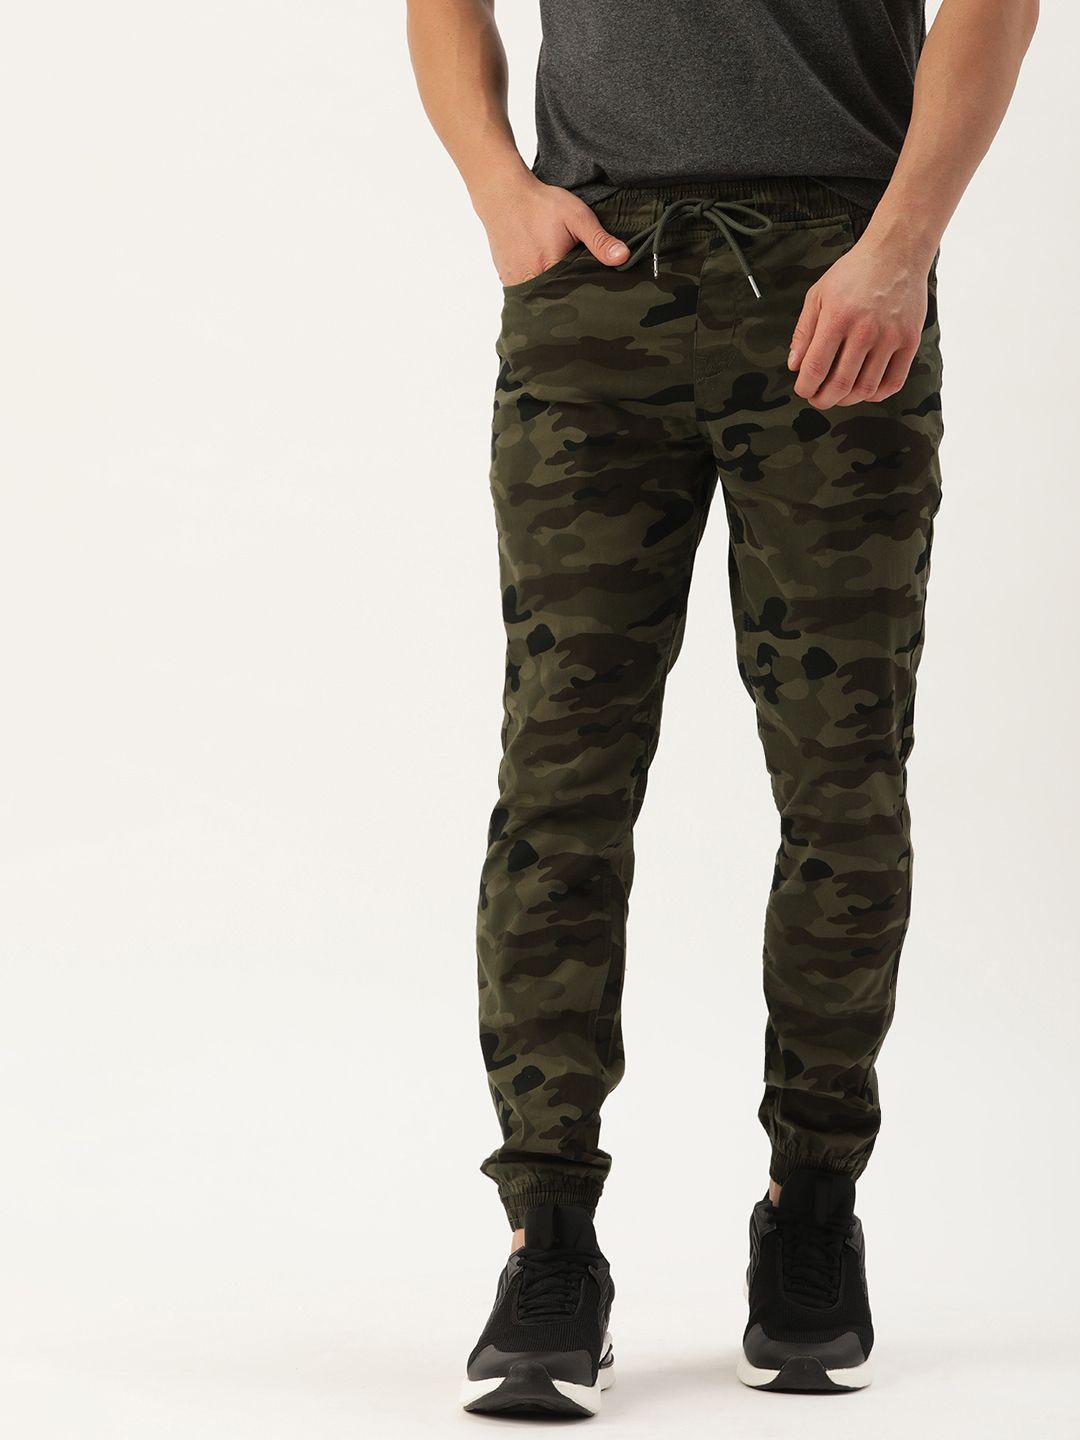 IVOC Men Olive Green Camouflage Printed Slim Fit Joggers Trousers